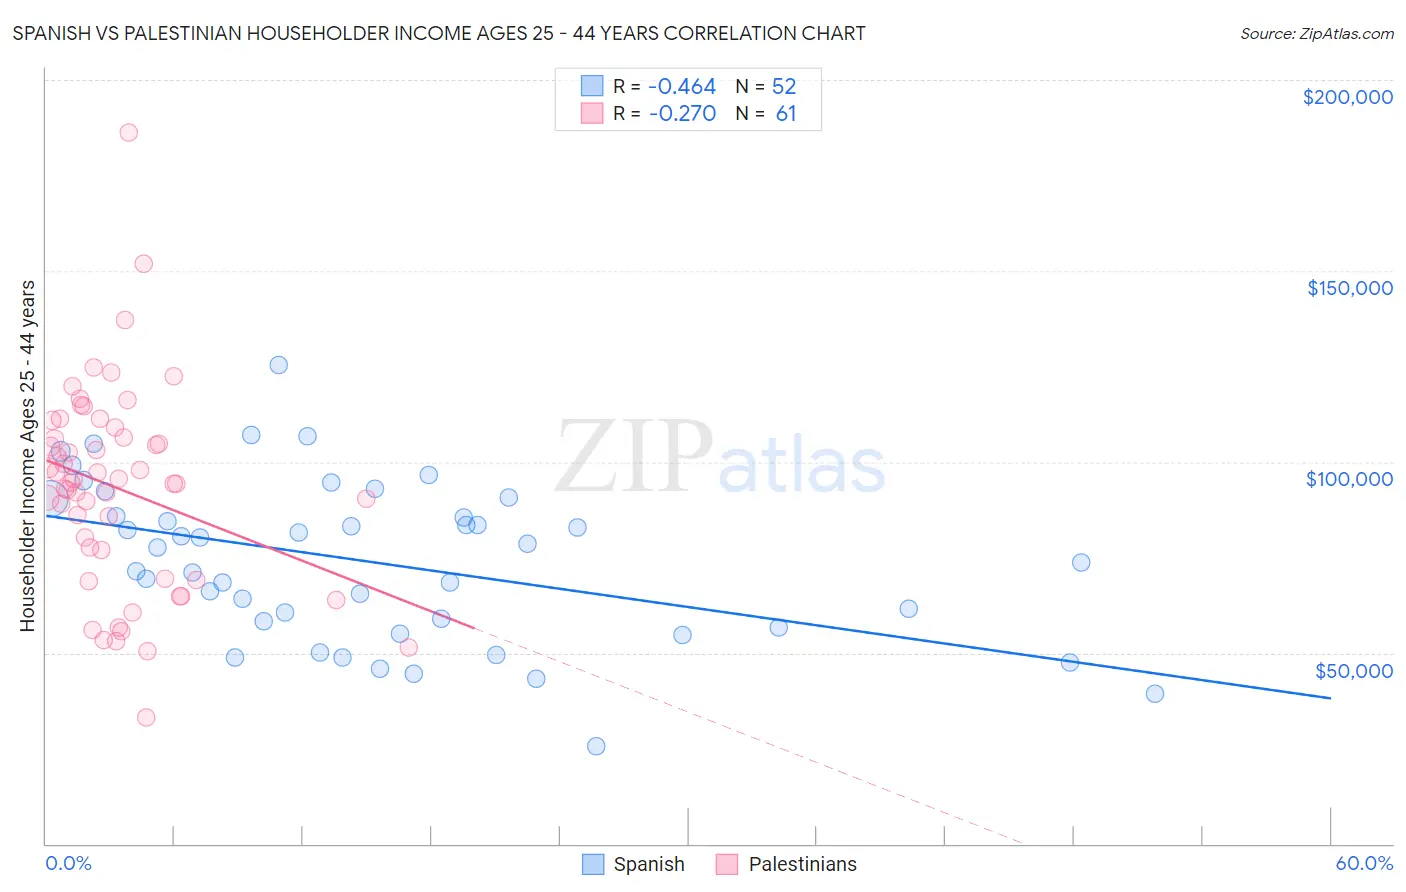 Spanish vs Palestinian Householder Income Ages 25 - 44 years